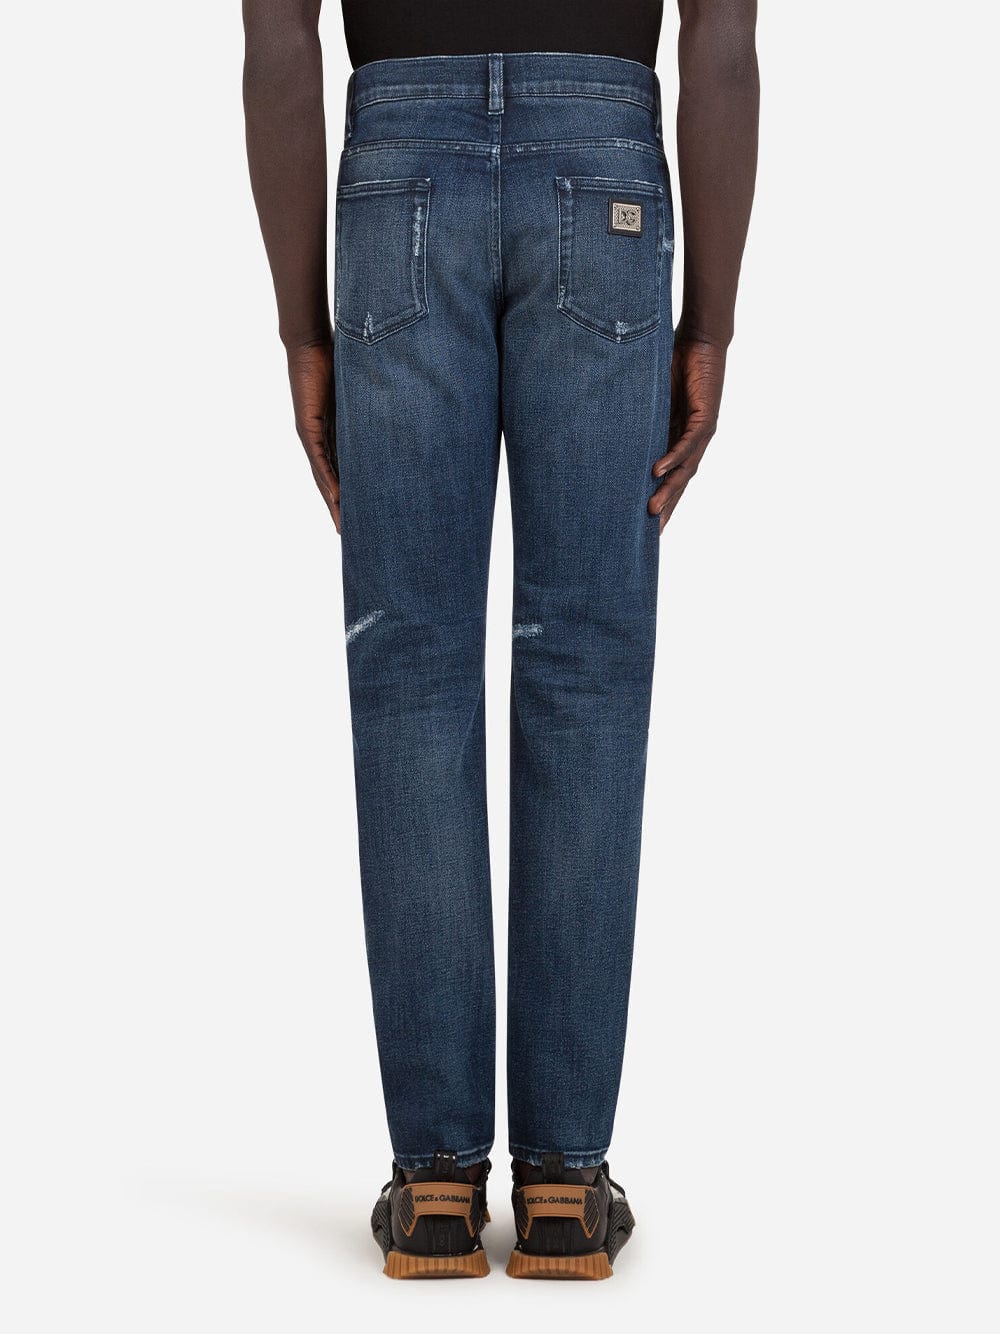 Dolce & Gabbana Slim-Fit Stretch Jeans With Rips